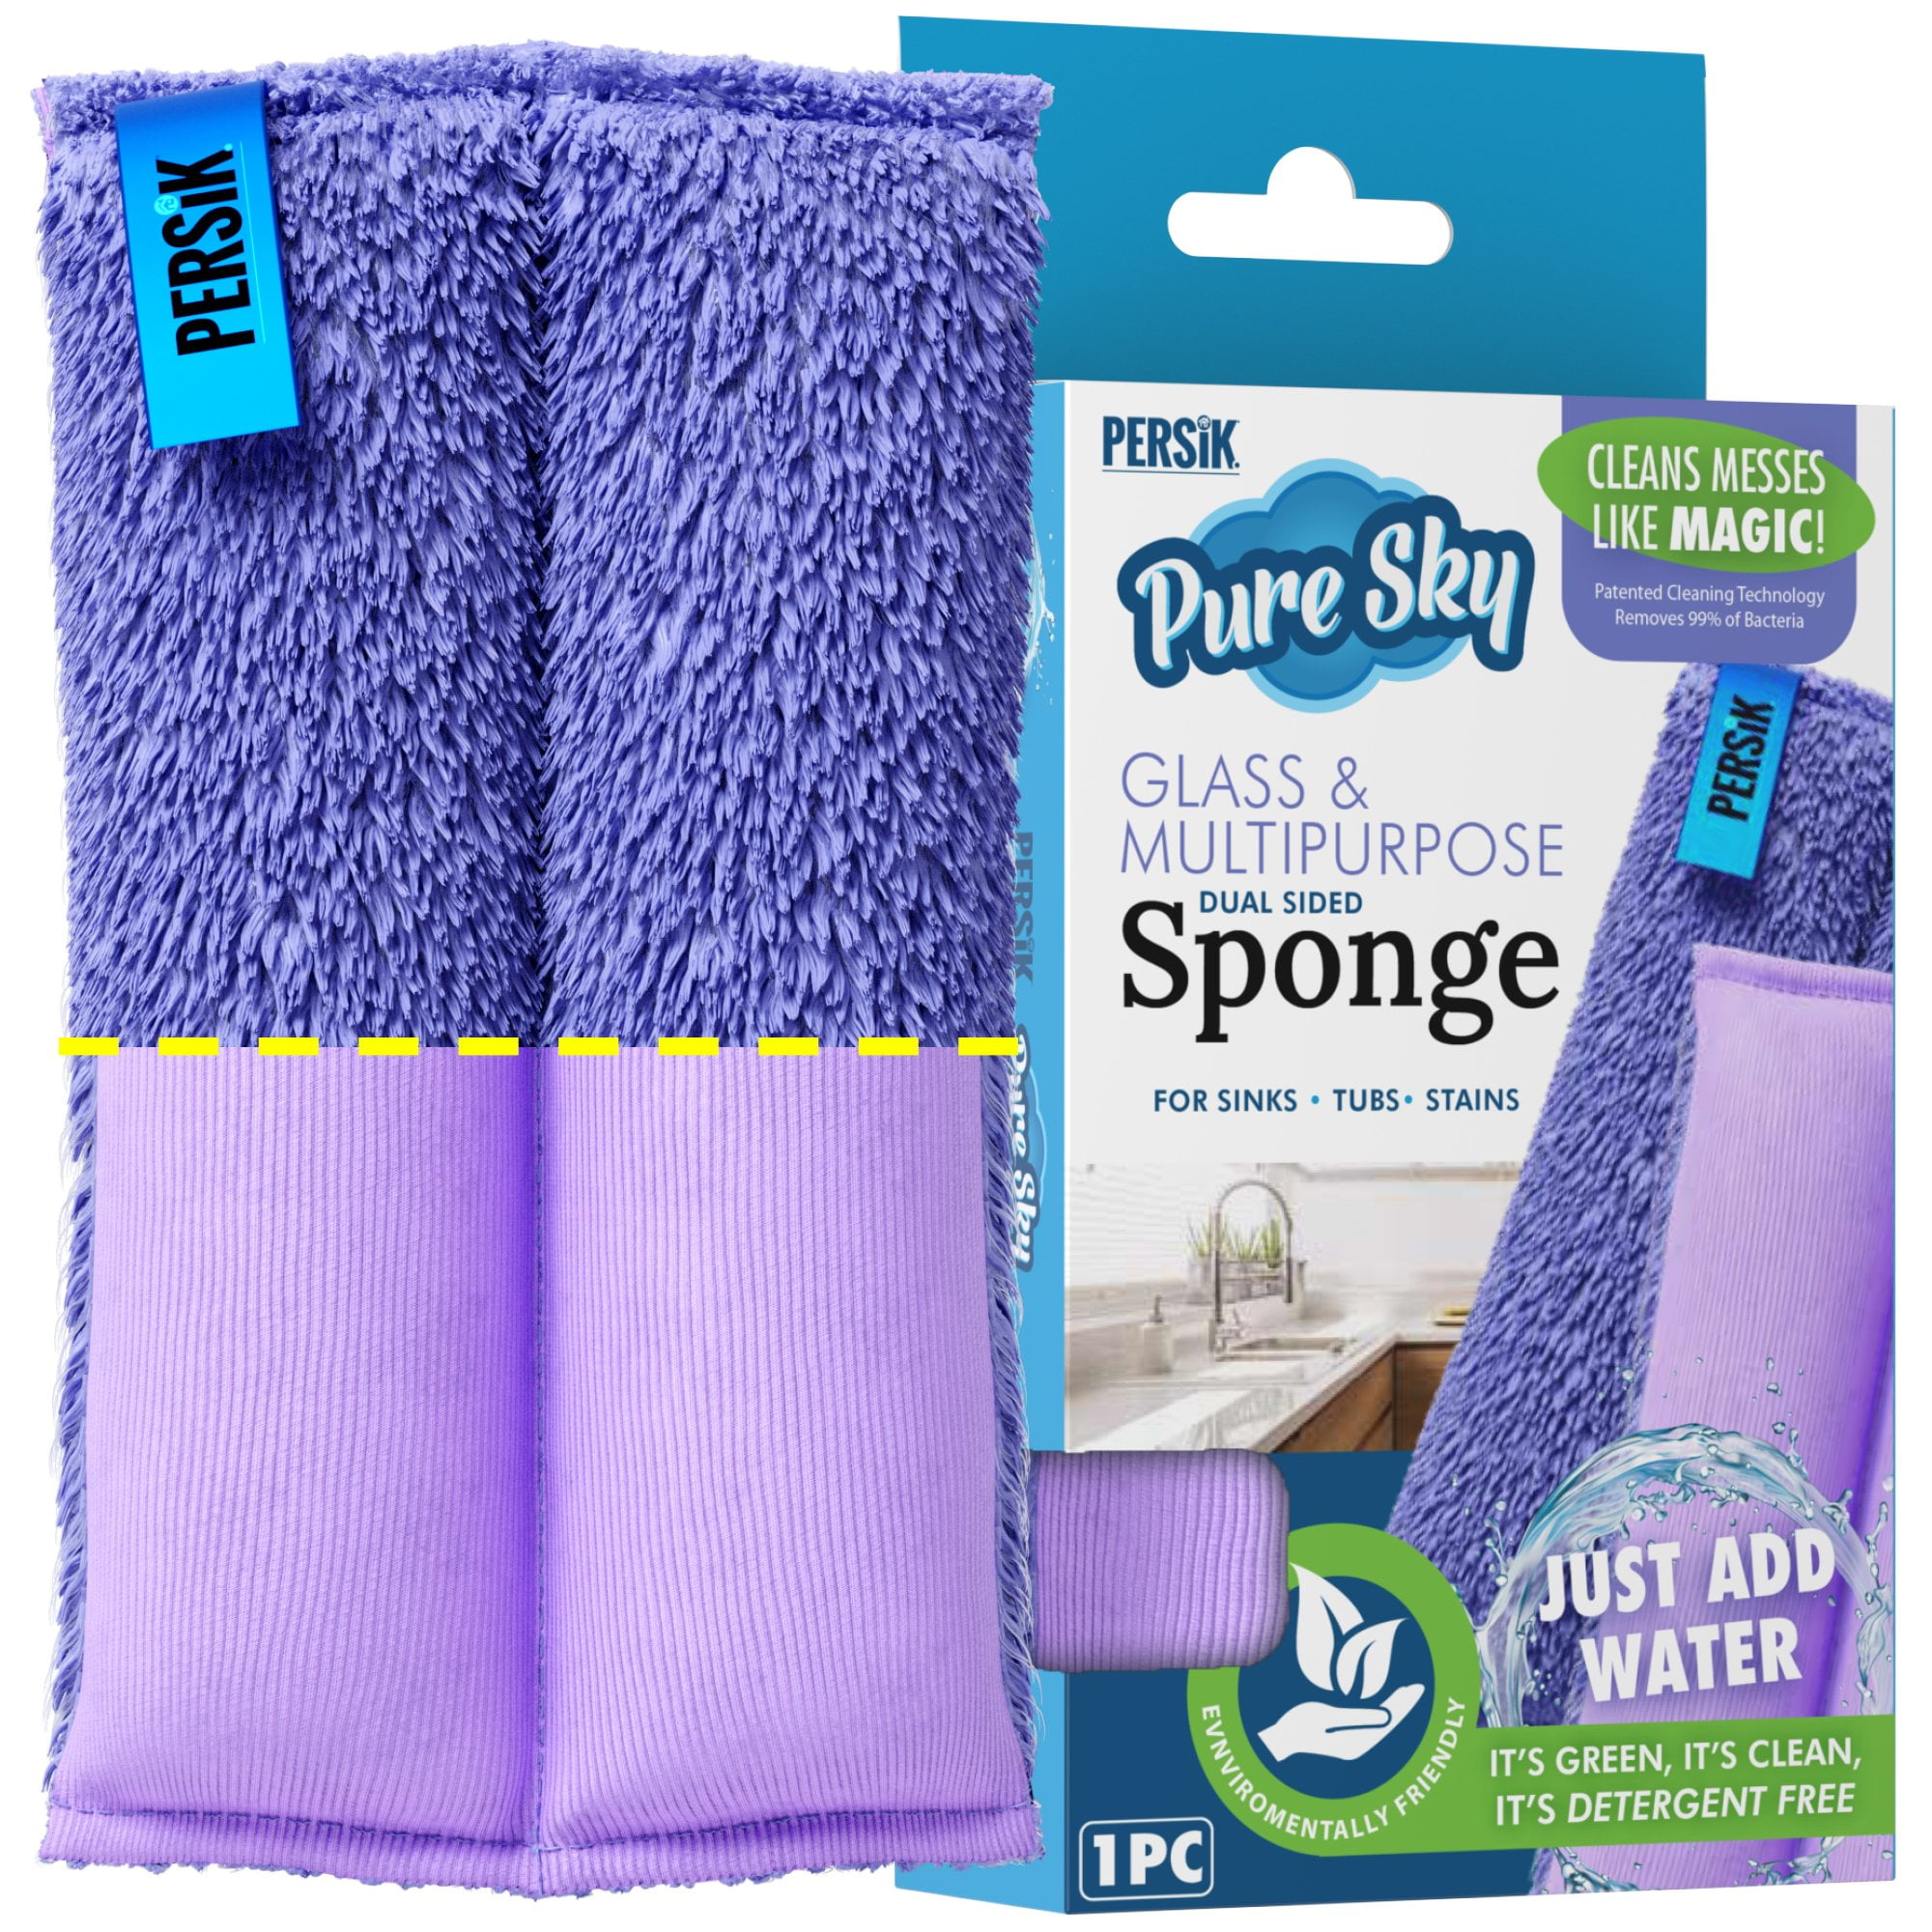 Multi-surface Microfiber Cleaning Cloths - 6ct - Everspring™ : Target